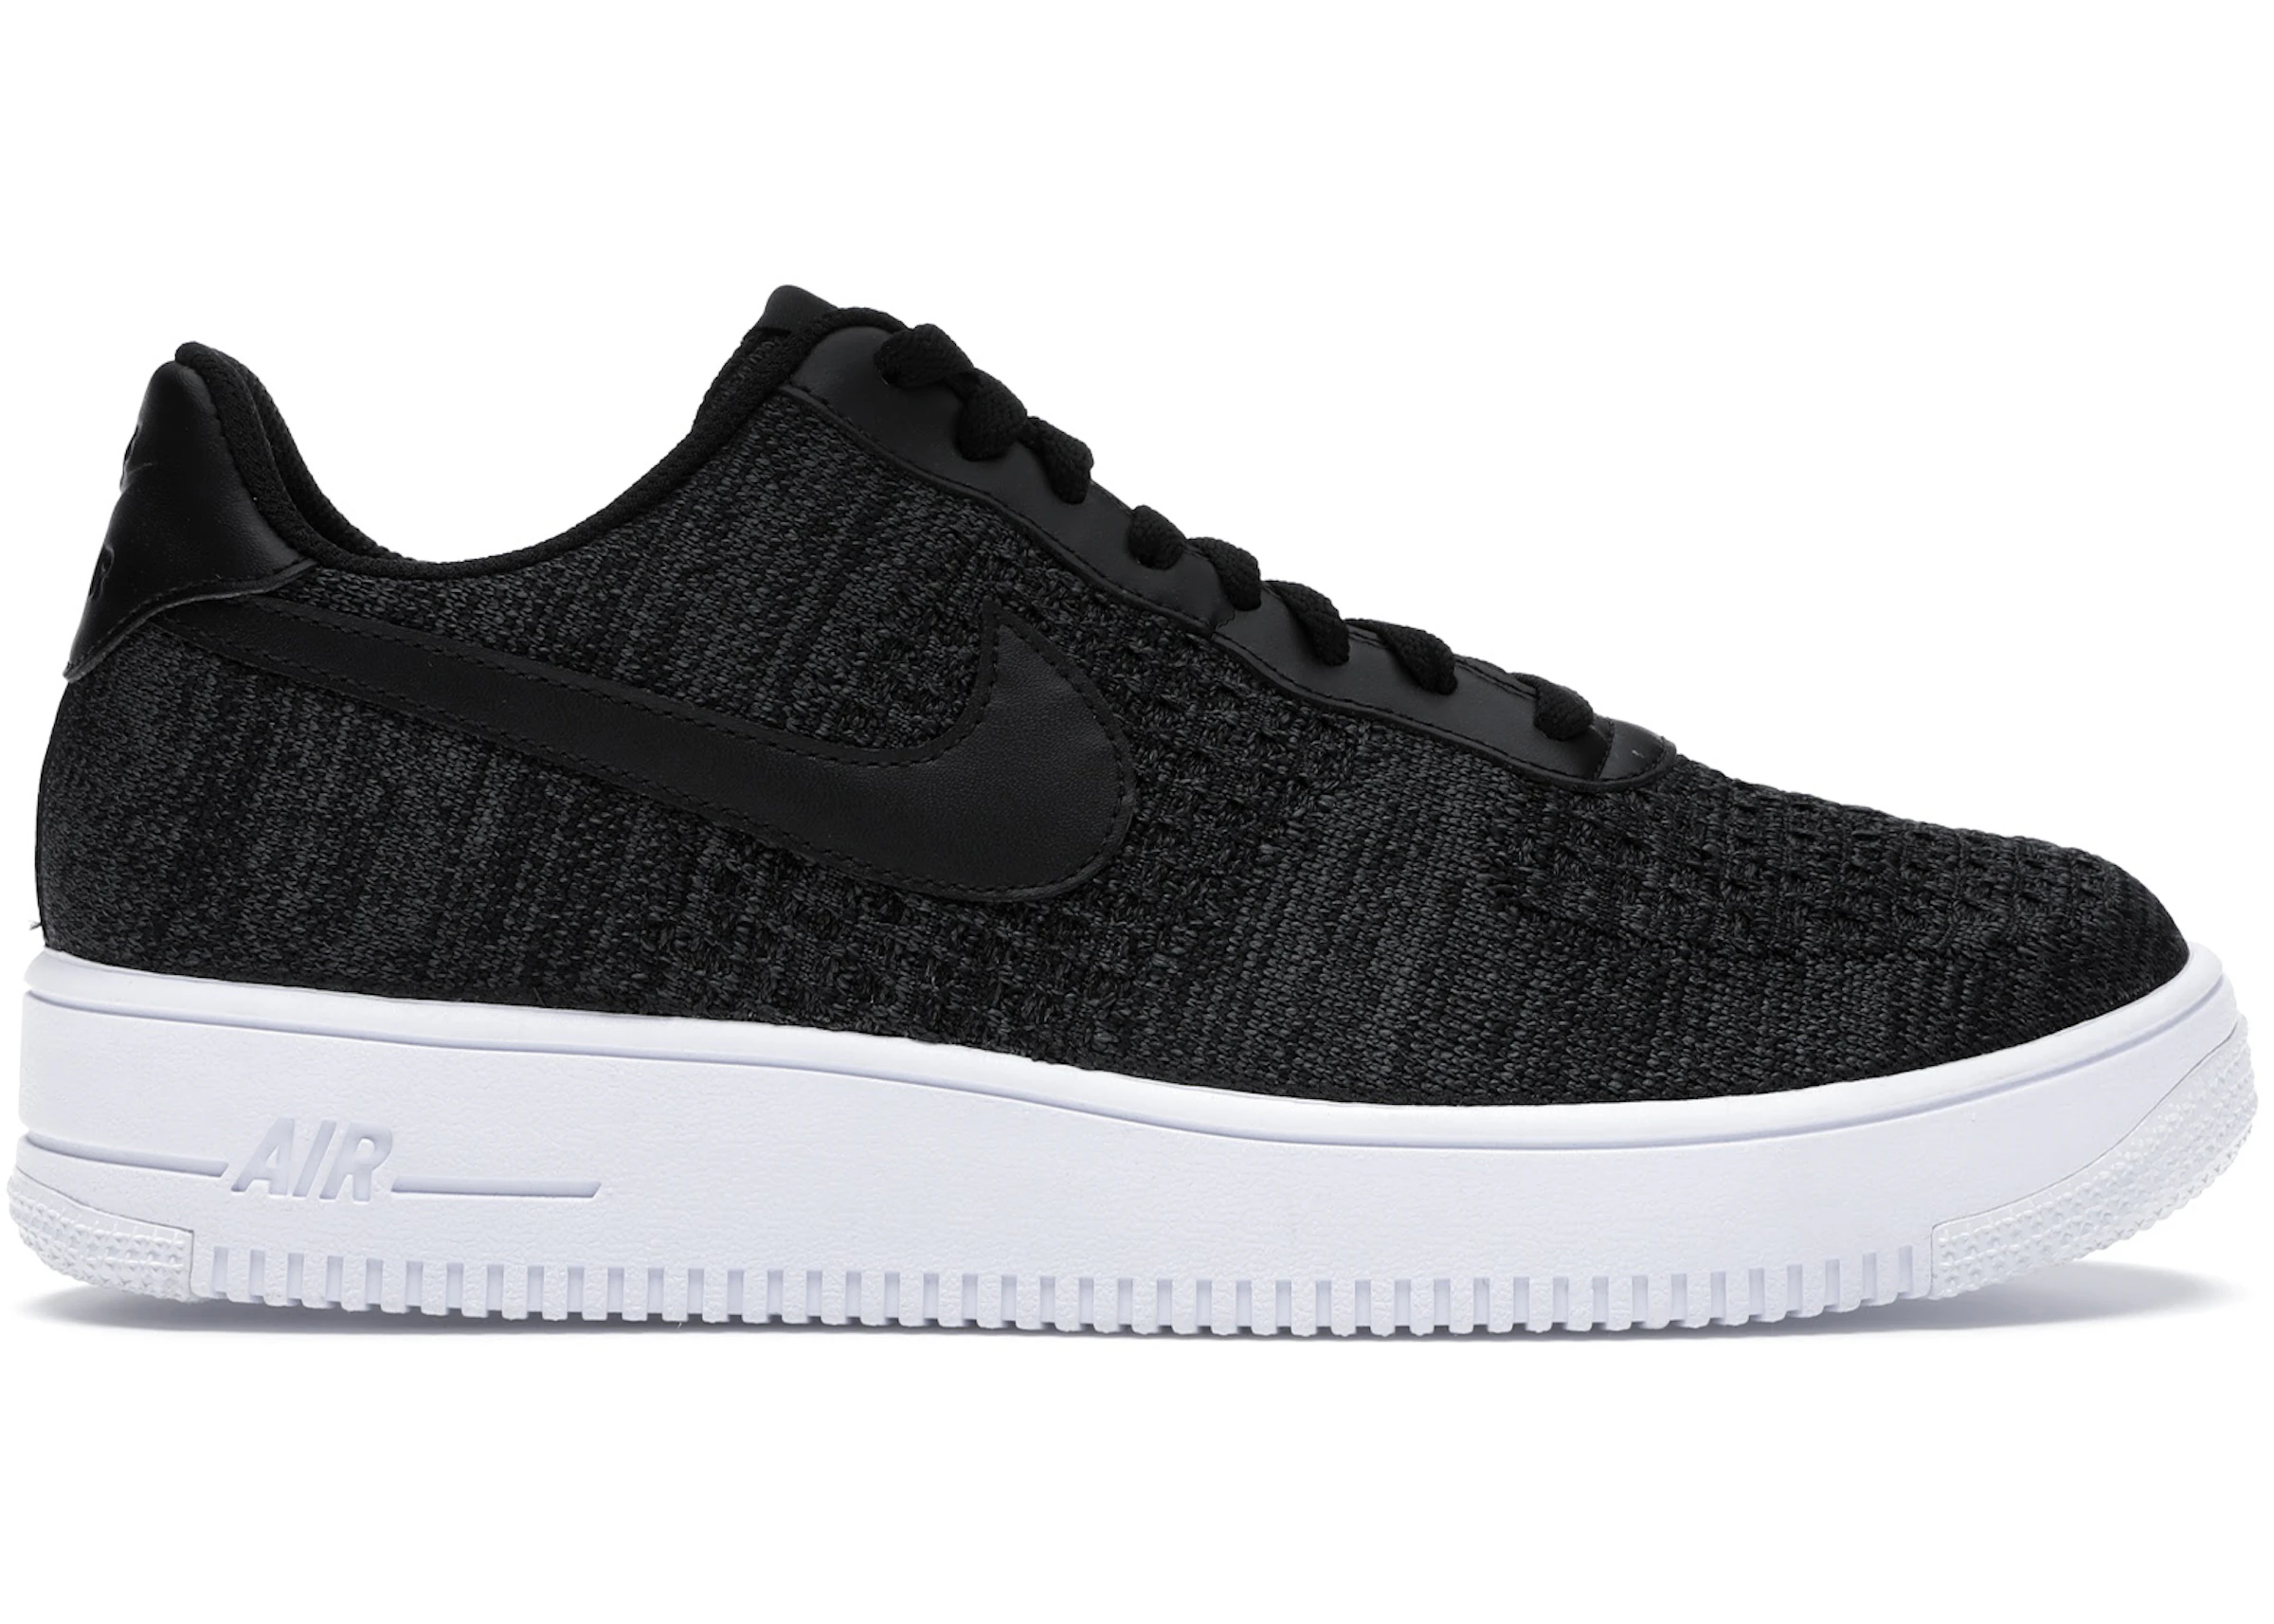 lineup Ambitious connect Nike Air Force 1 Flyknit 2.0 Black - CI0051-001 - US